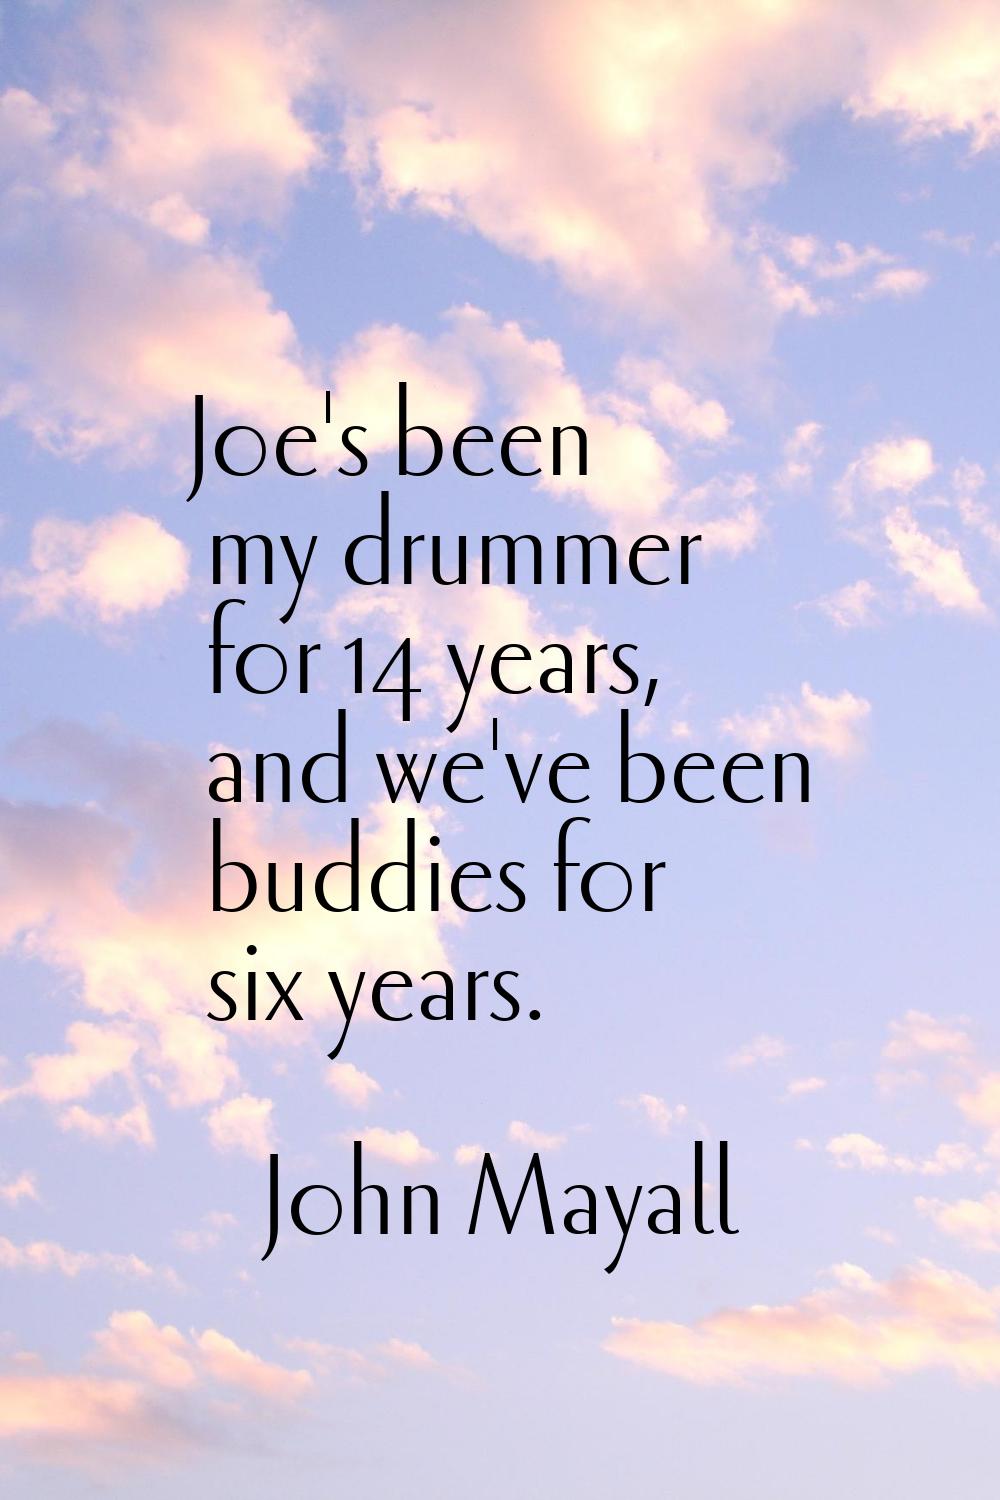 Joe's been my drummer for 14 years, and we've been buddies for six years.